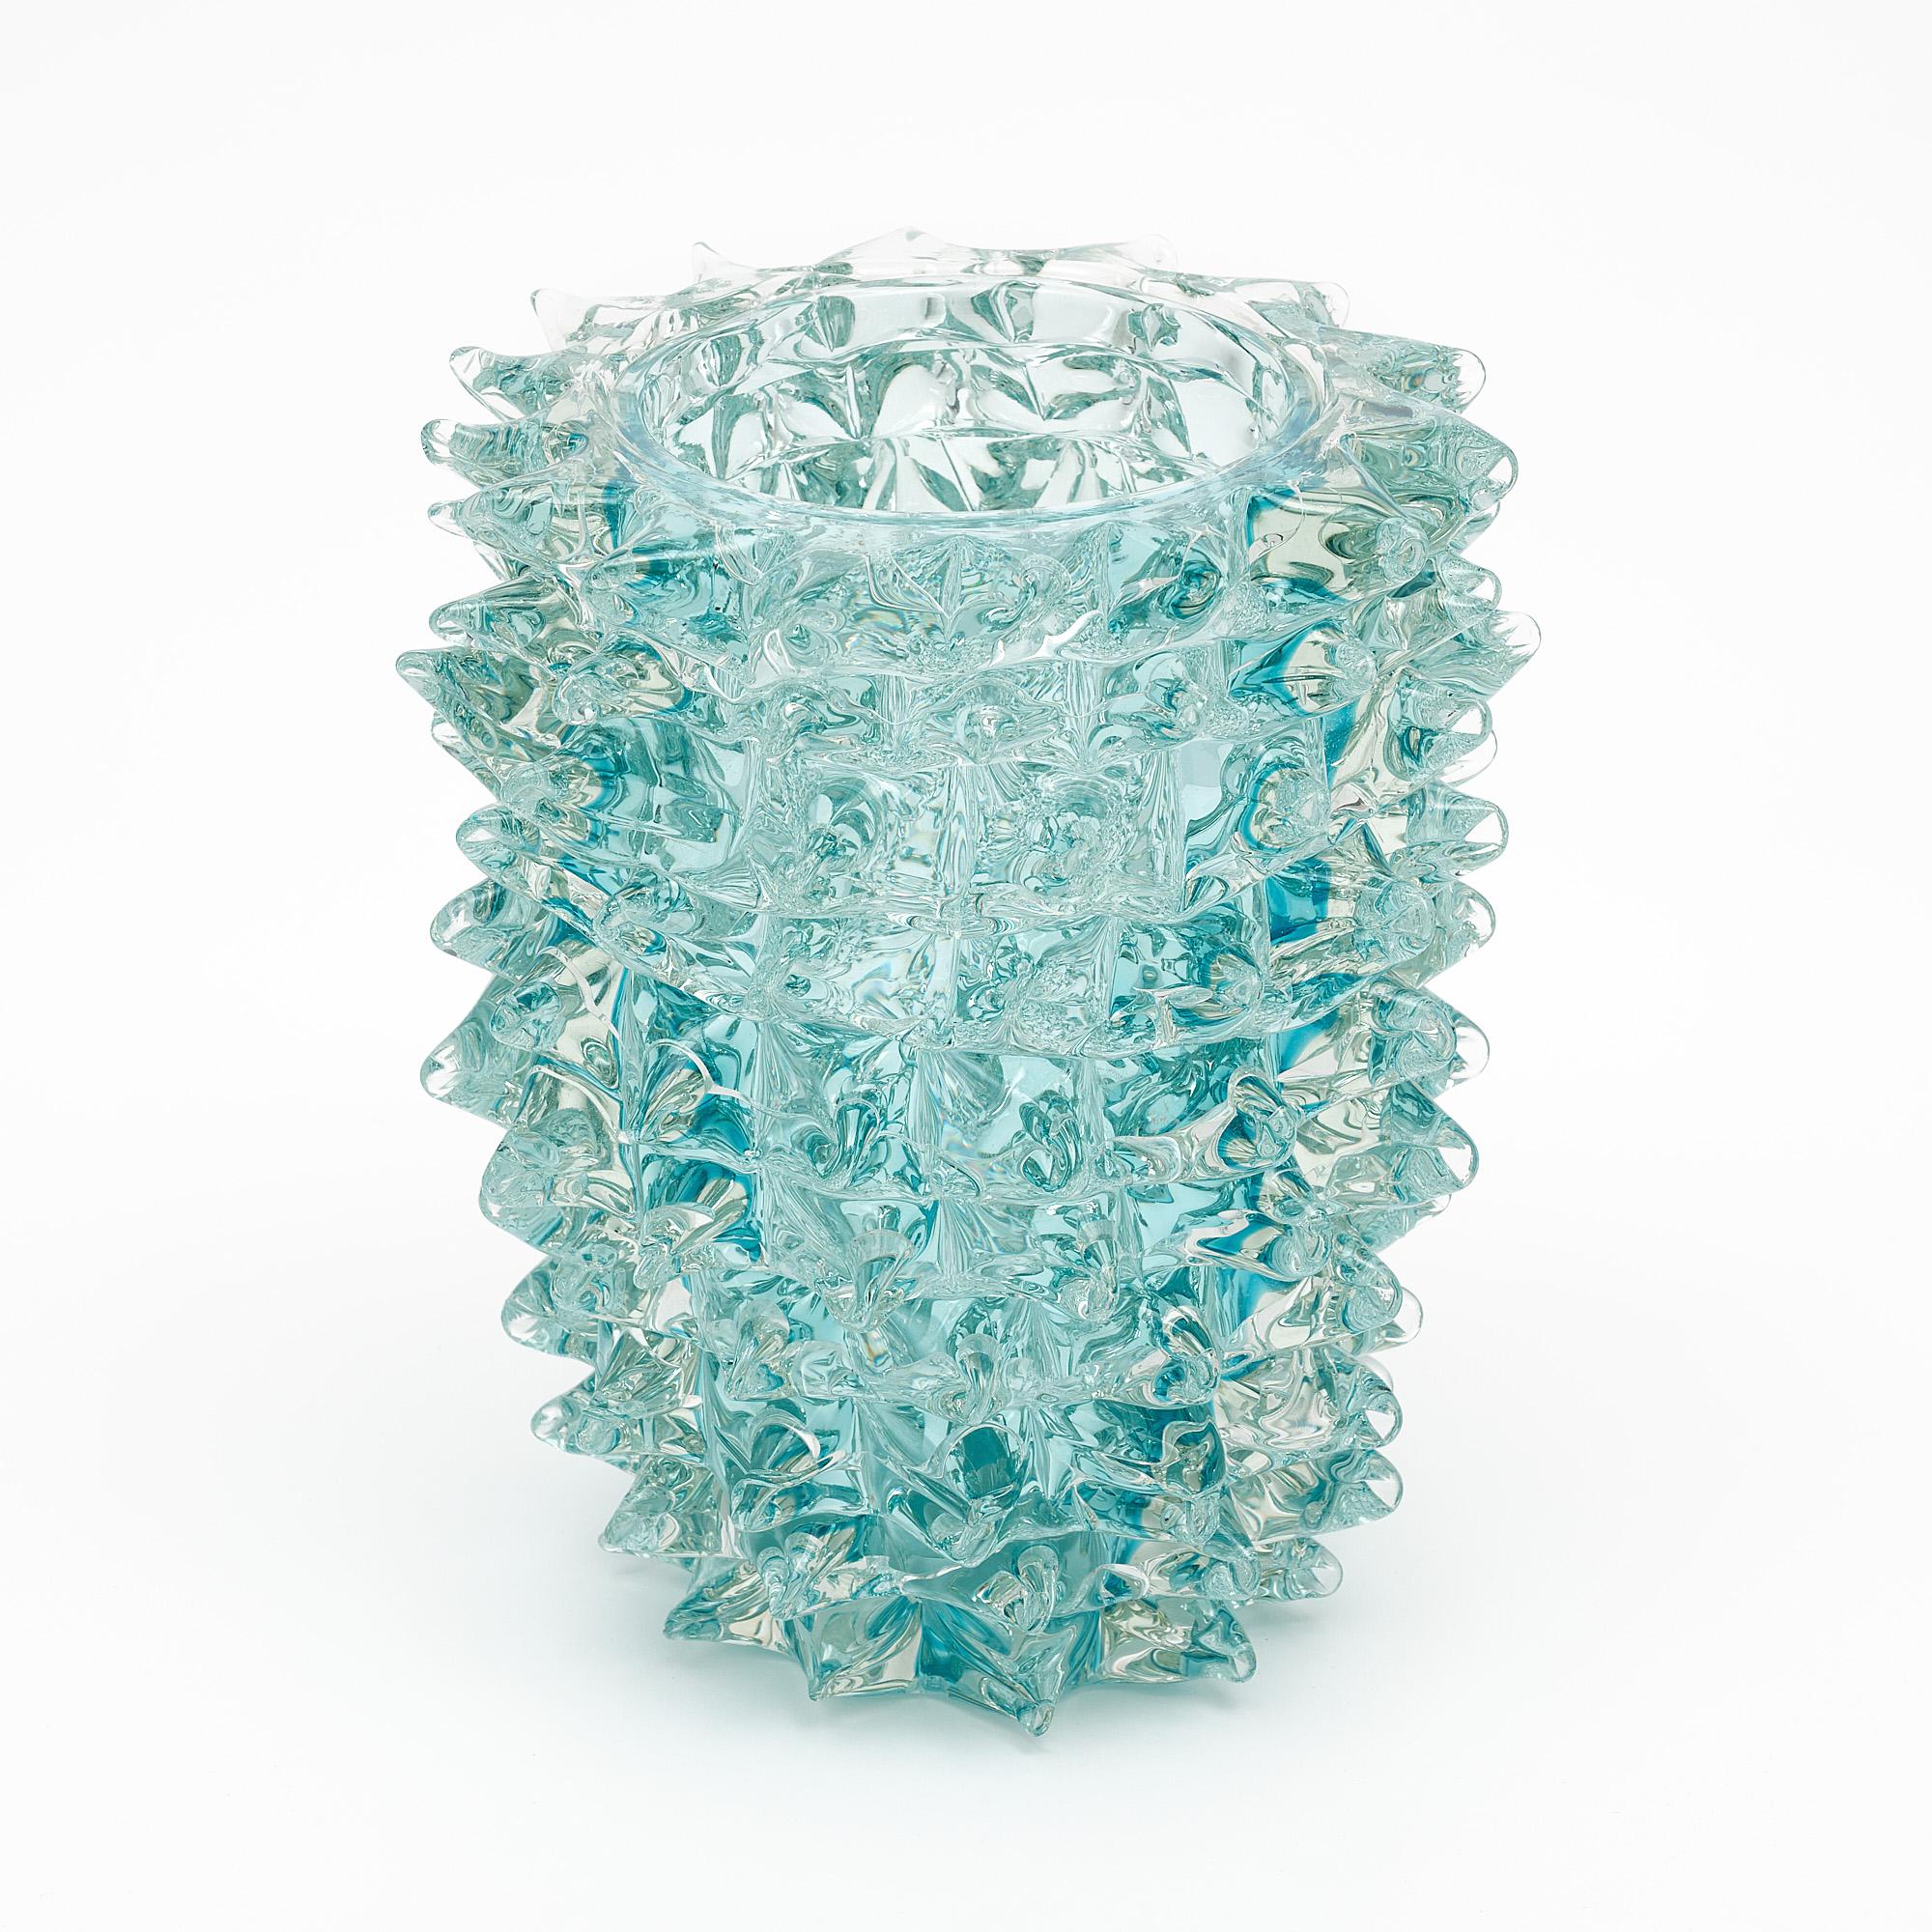 Italian Murano glass vase, in Aqua color, crafted in the “rostrate” technique, in the manner of iconic Murano glass powerhouse “ Barovier “, mimicking birds beaks. We love the striking Aqua color and texture of the “rostrate” technique.